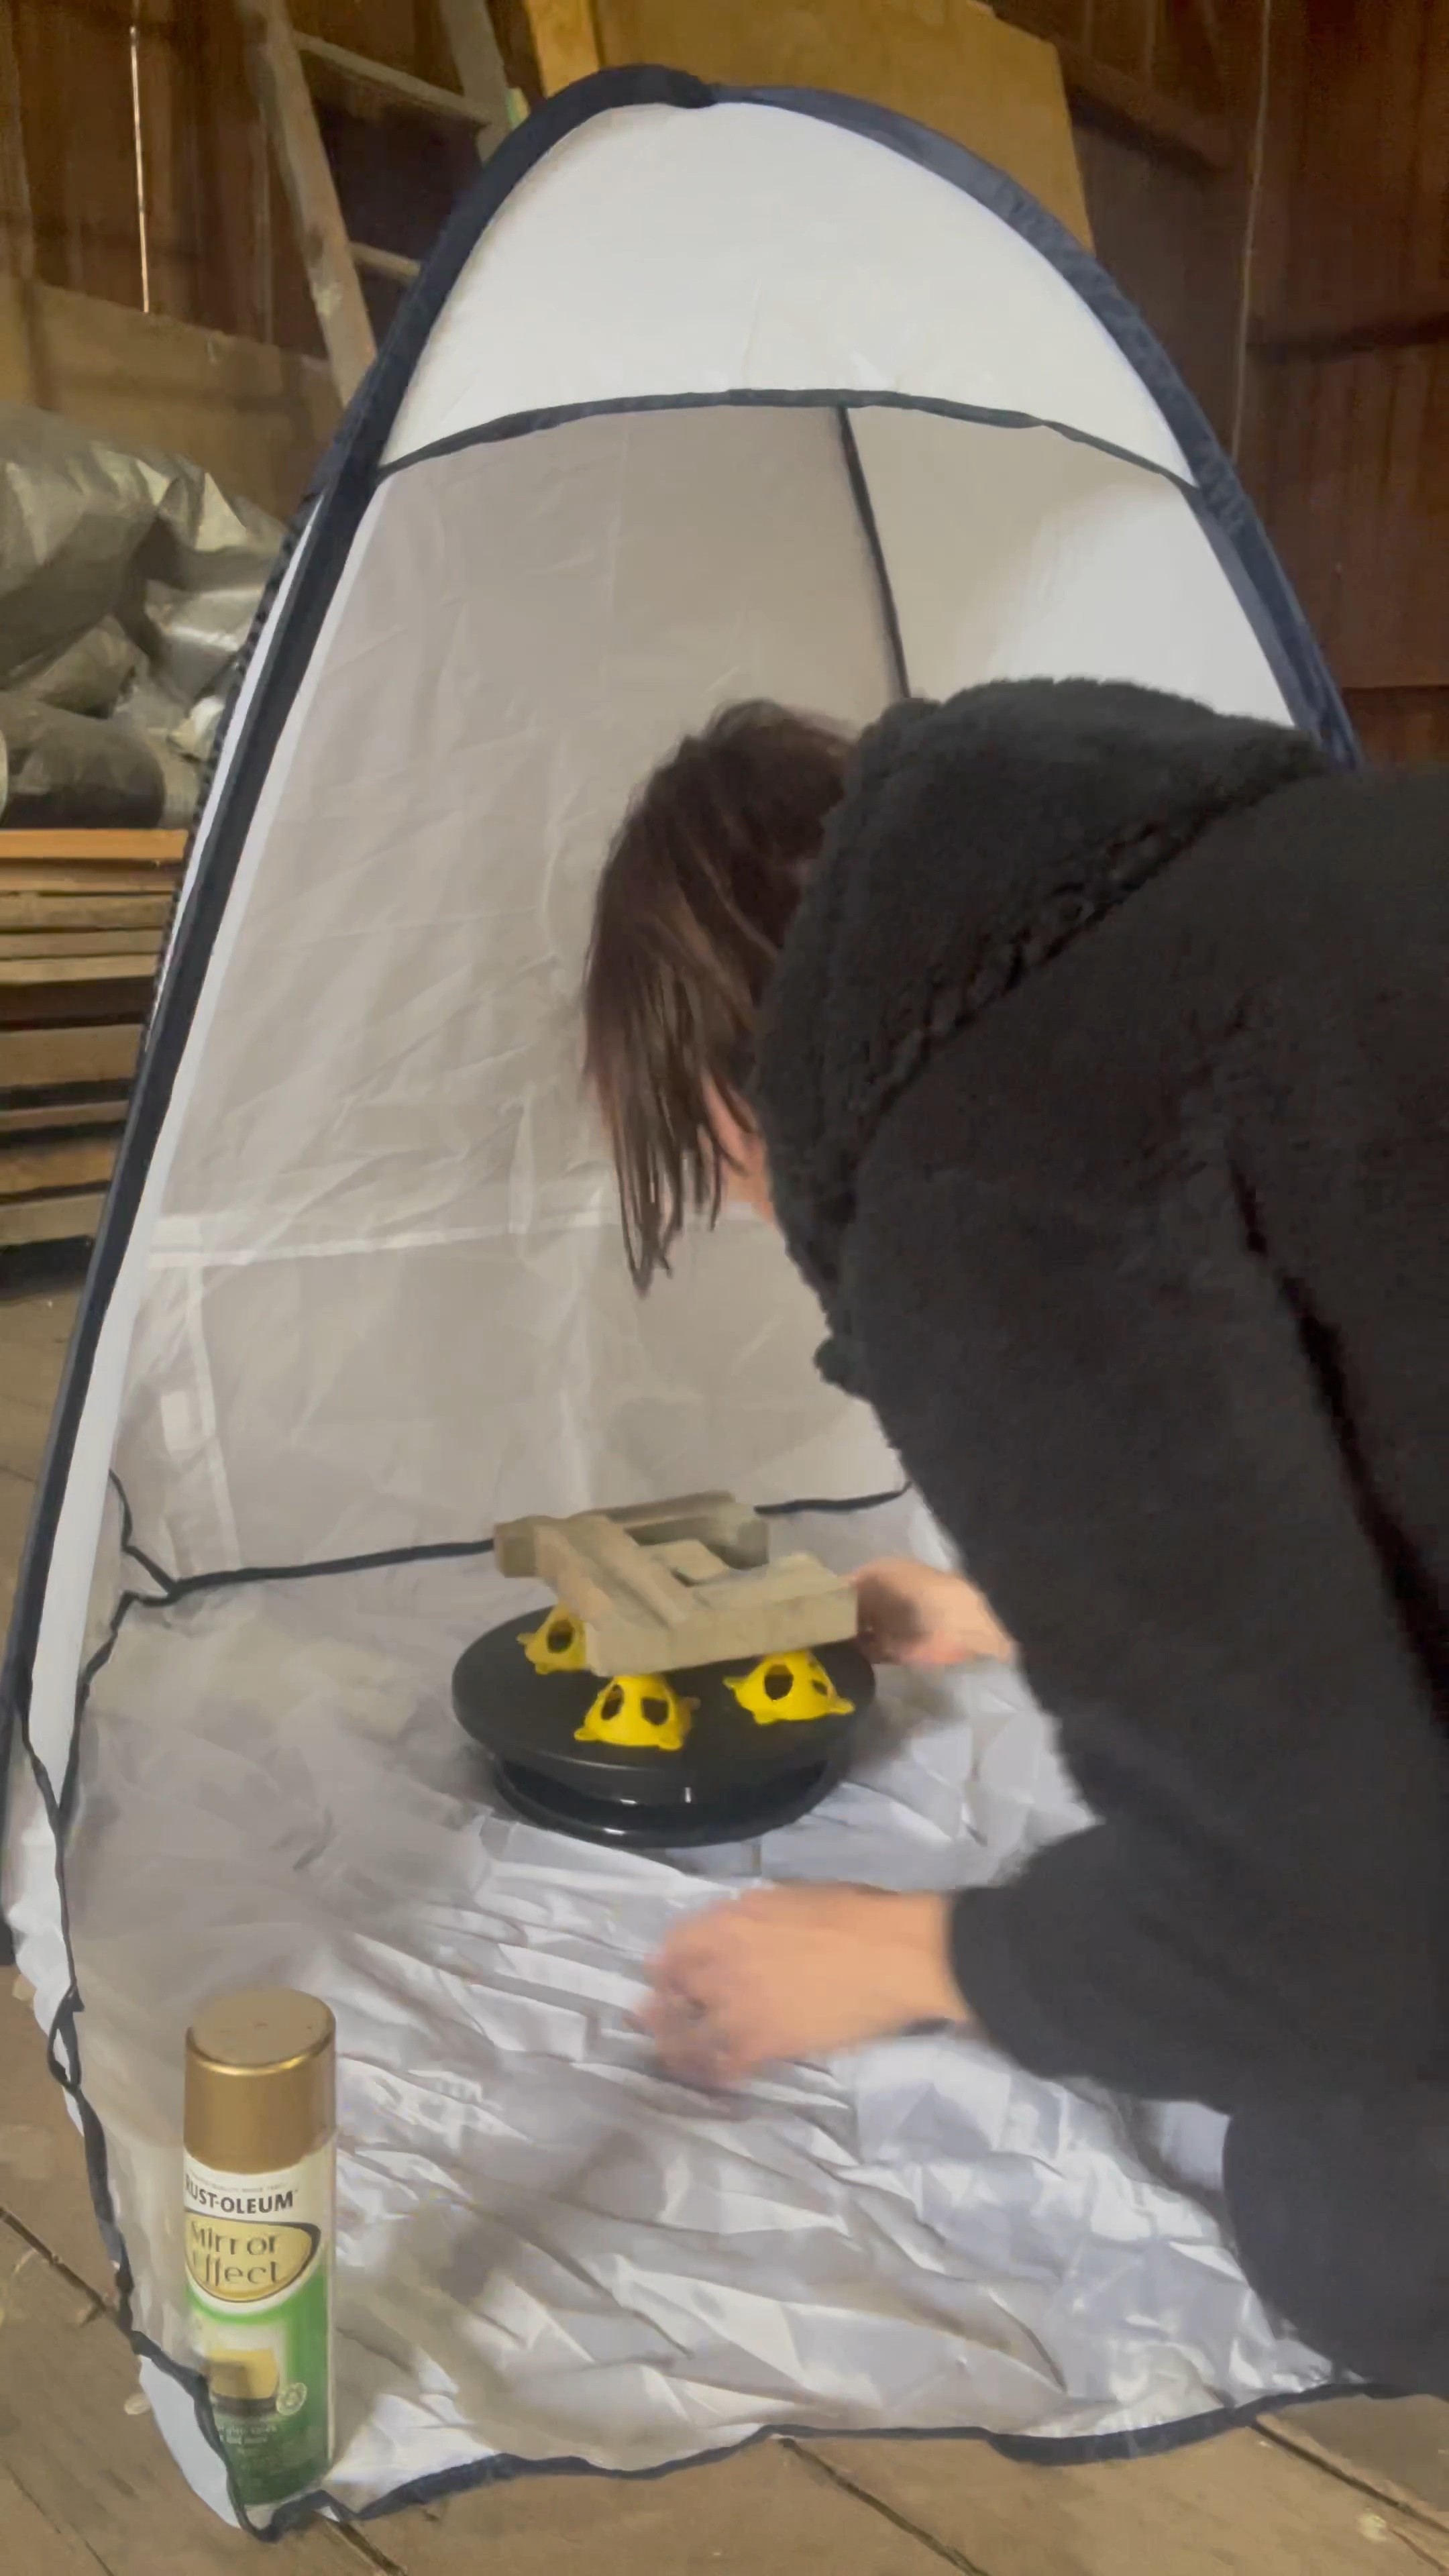  PLANTIONAL Portable Paint Tent For Spray Painting